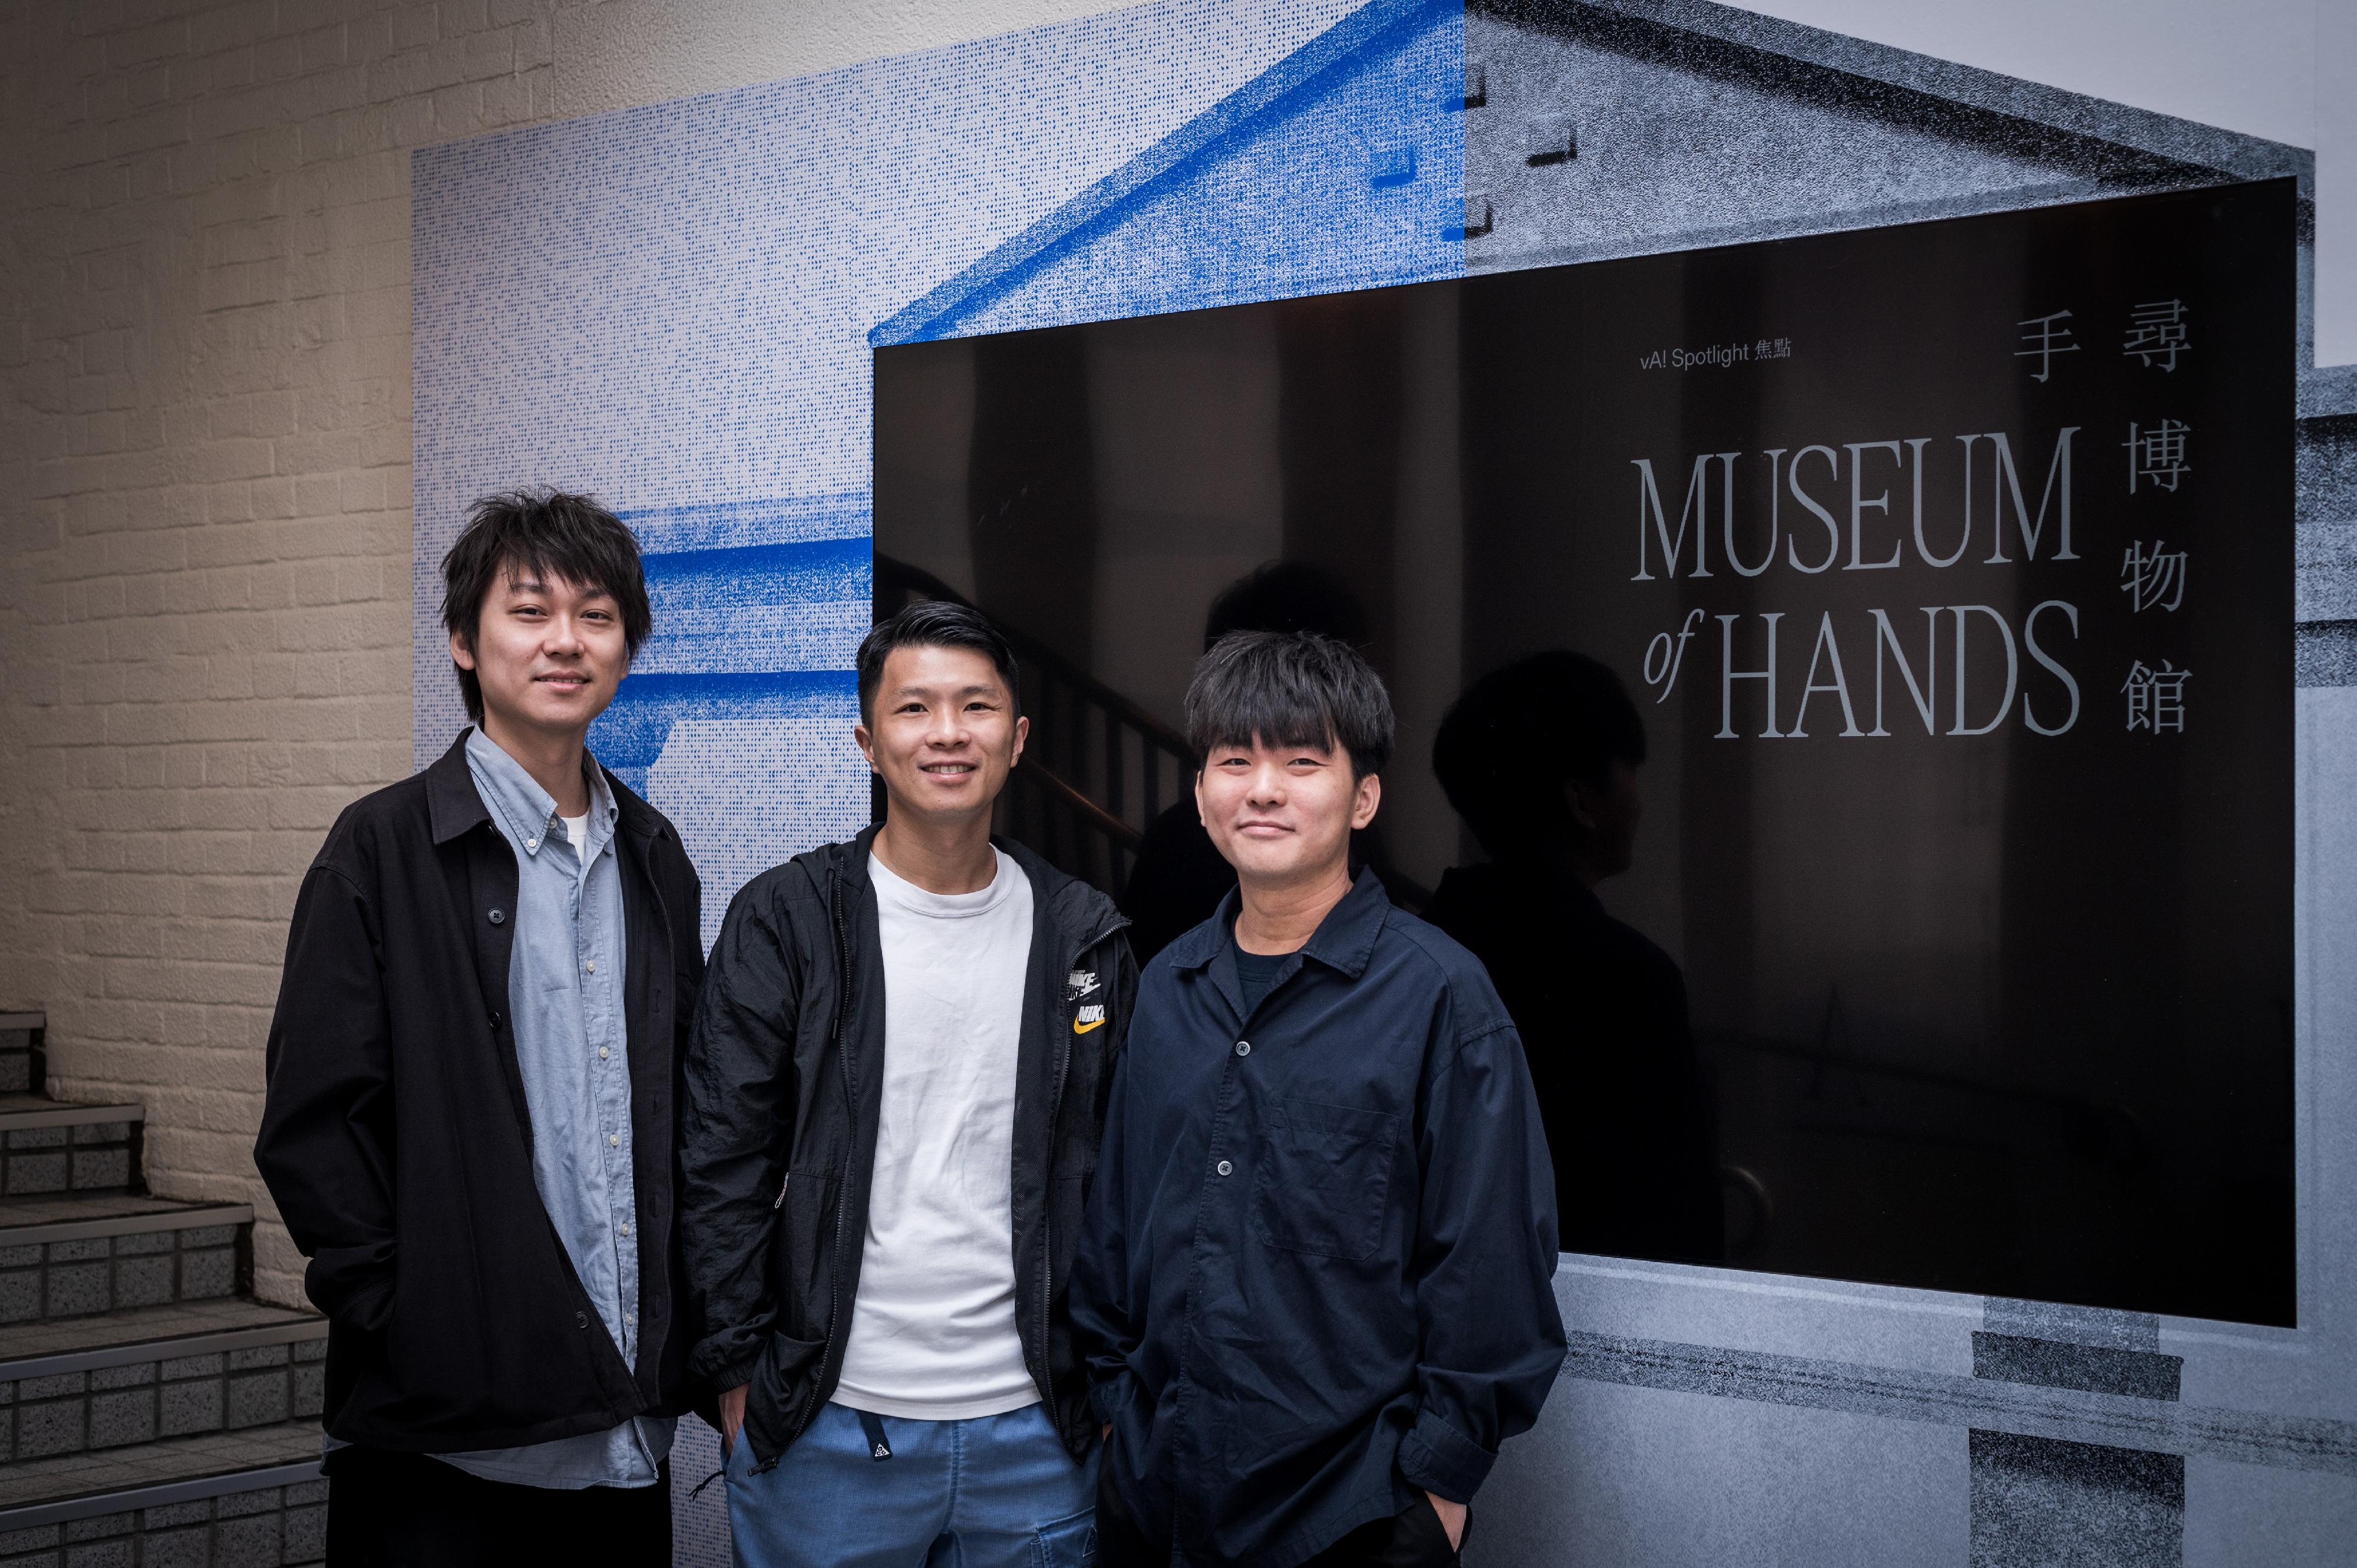 The Hong Kong Visual Arts Centre will stage the "vA! Spotlight - Museum of Hands" exhibition from tomorrow (March 22), showcasing a series of artworks created by local art group Brainrental. Photo shows members of Brainrental.